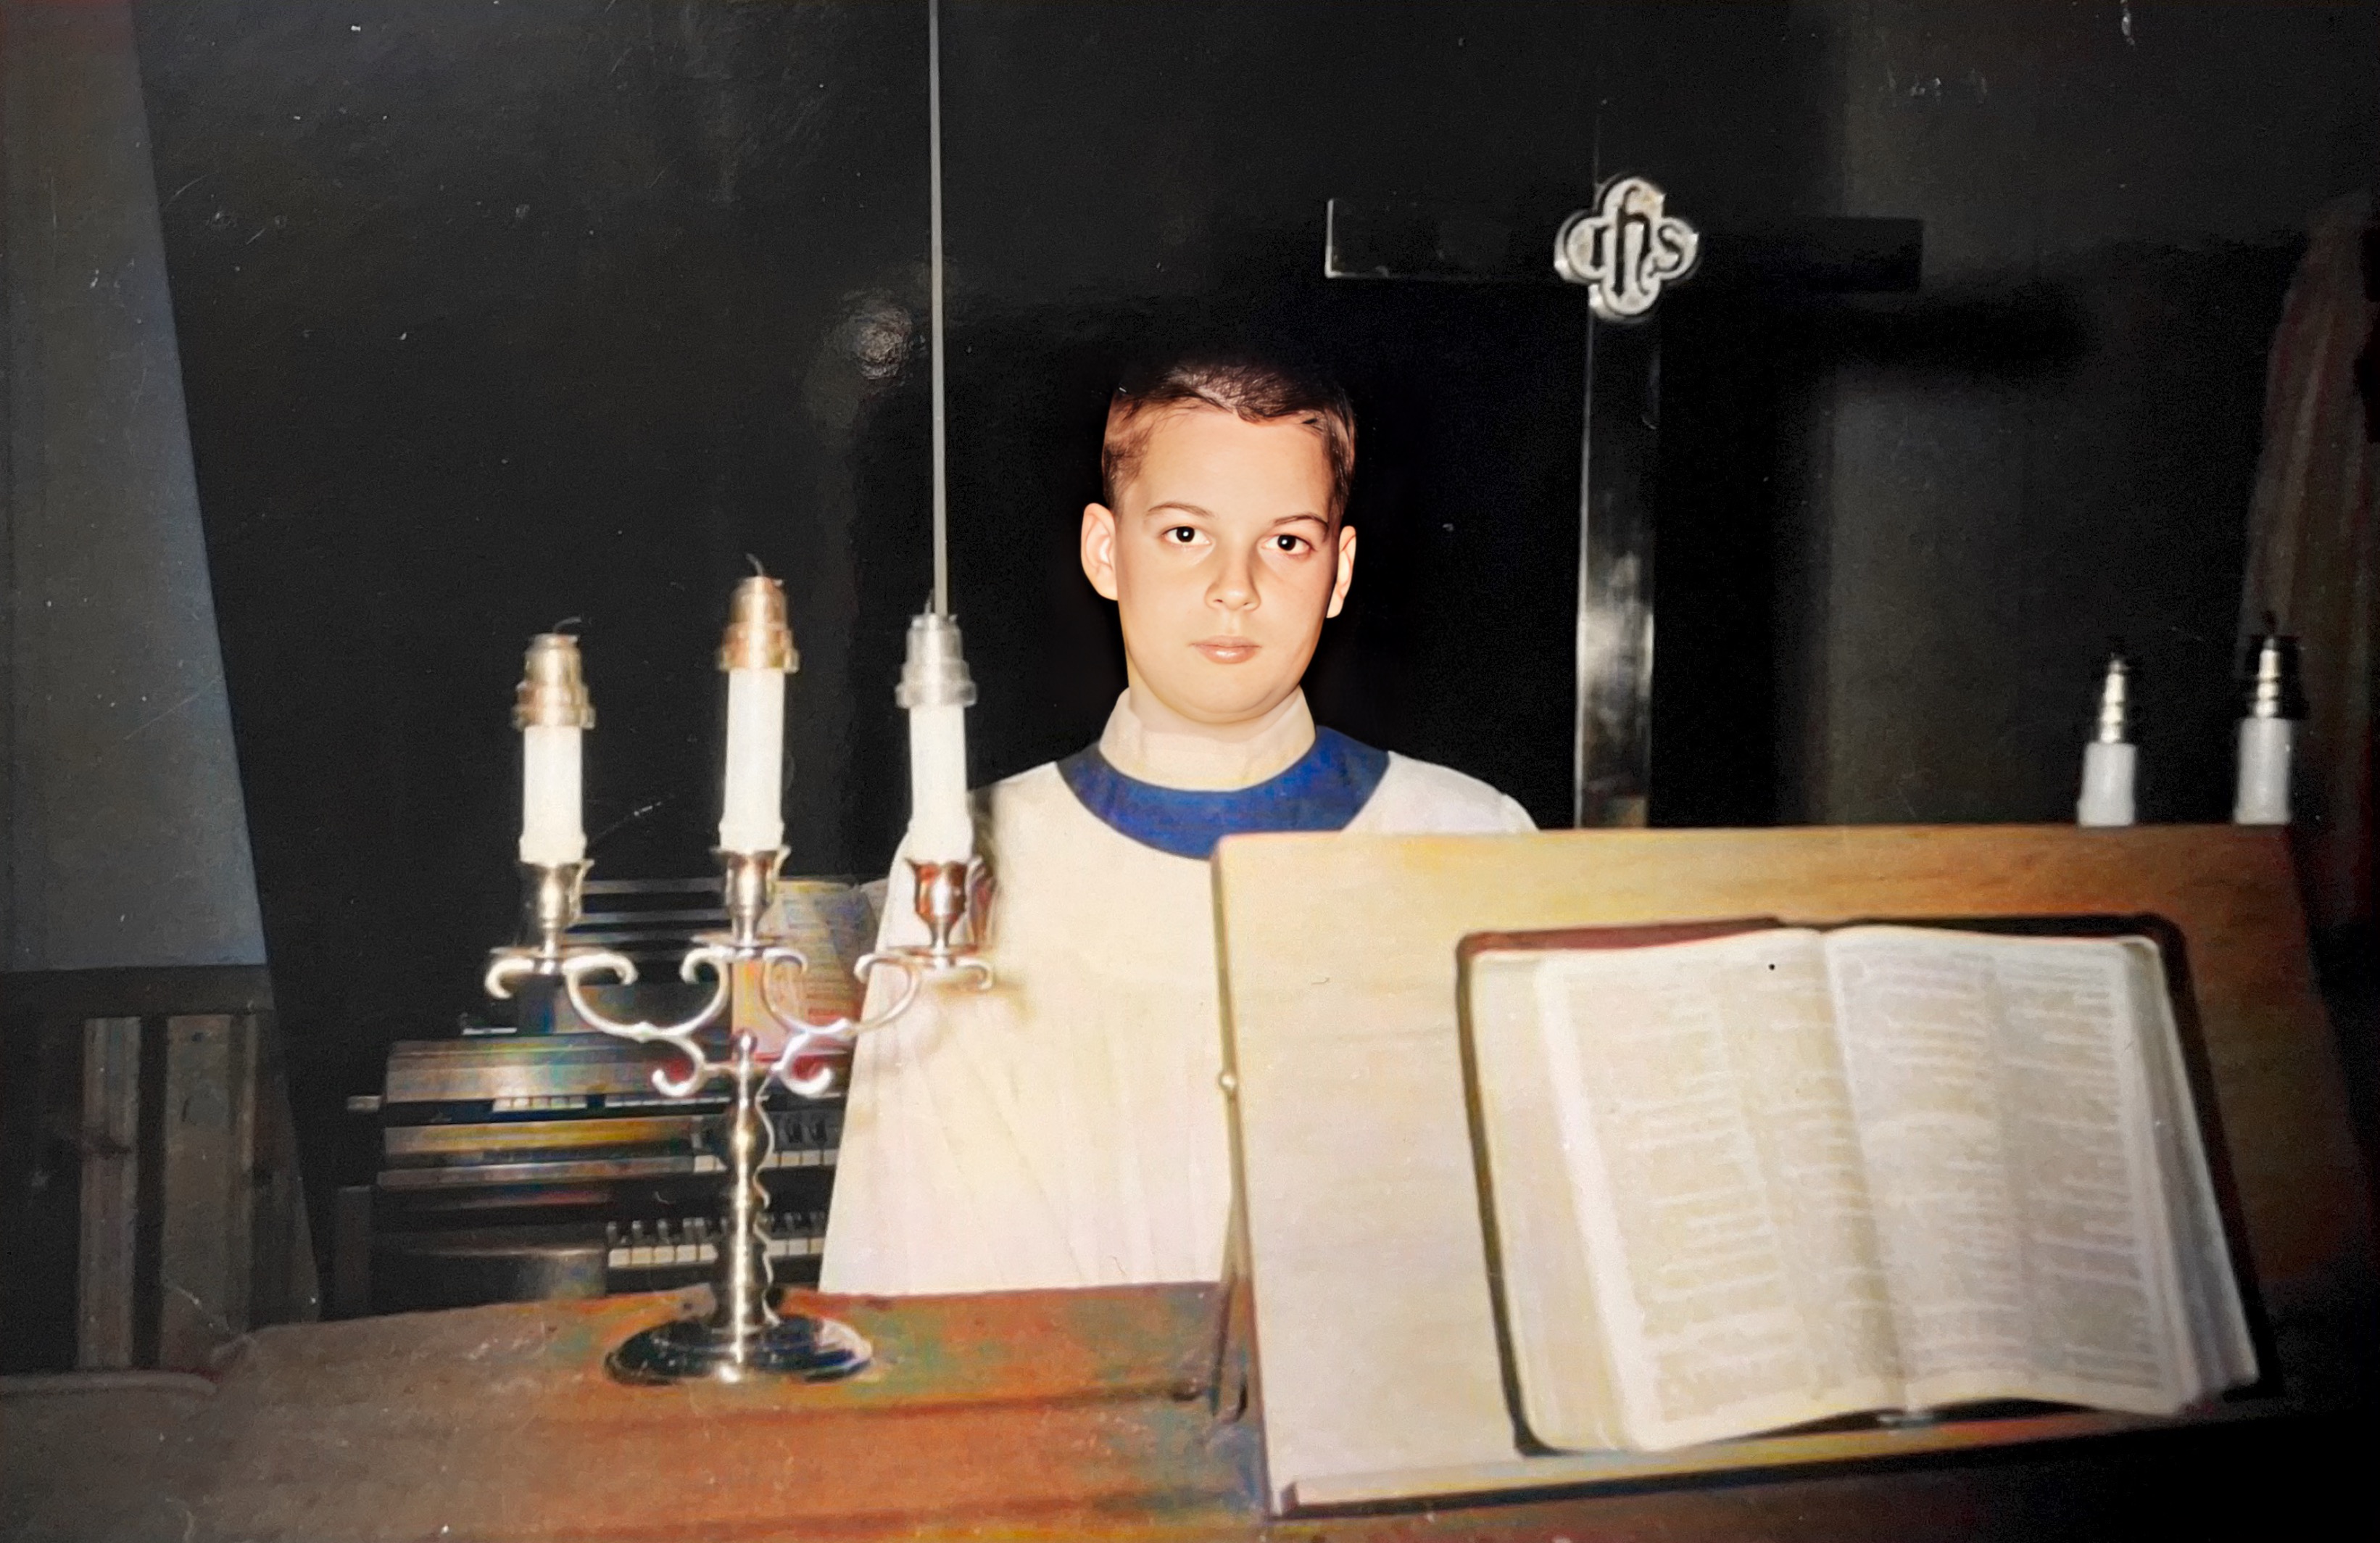 Freddy Stockton Dec 1960 at Centenary Church. He would pass away in less than 30 days after this photo.